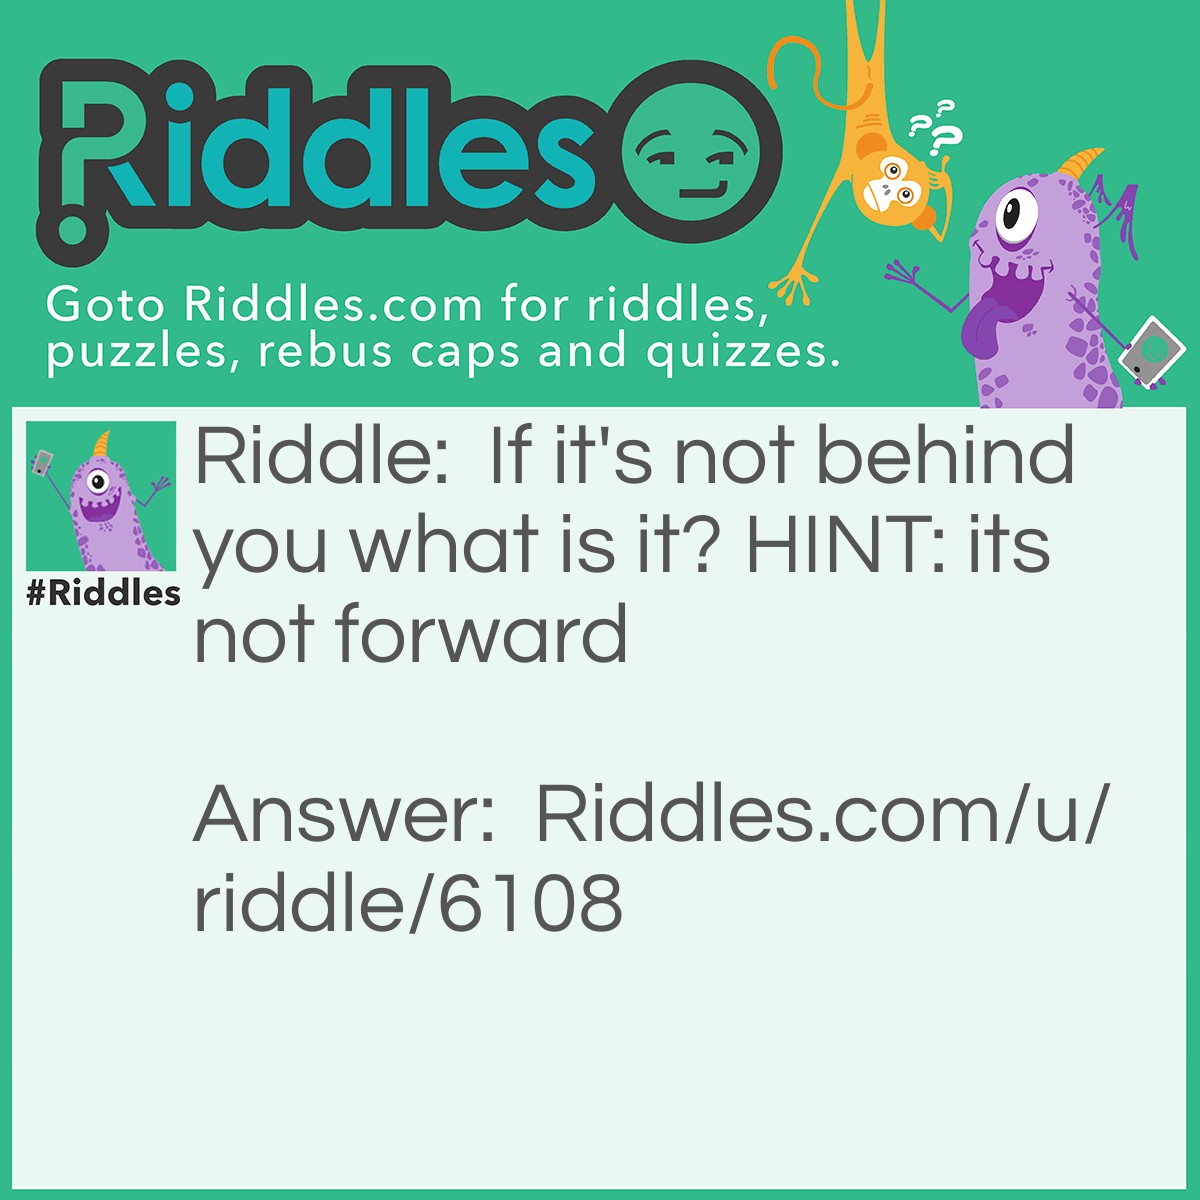 Riddle: If it's not behind you what is it? HINT: its not forward Answer: It's ahead.